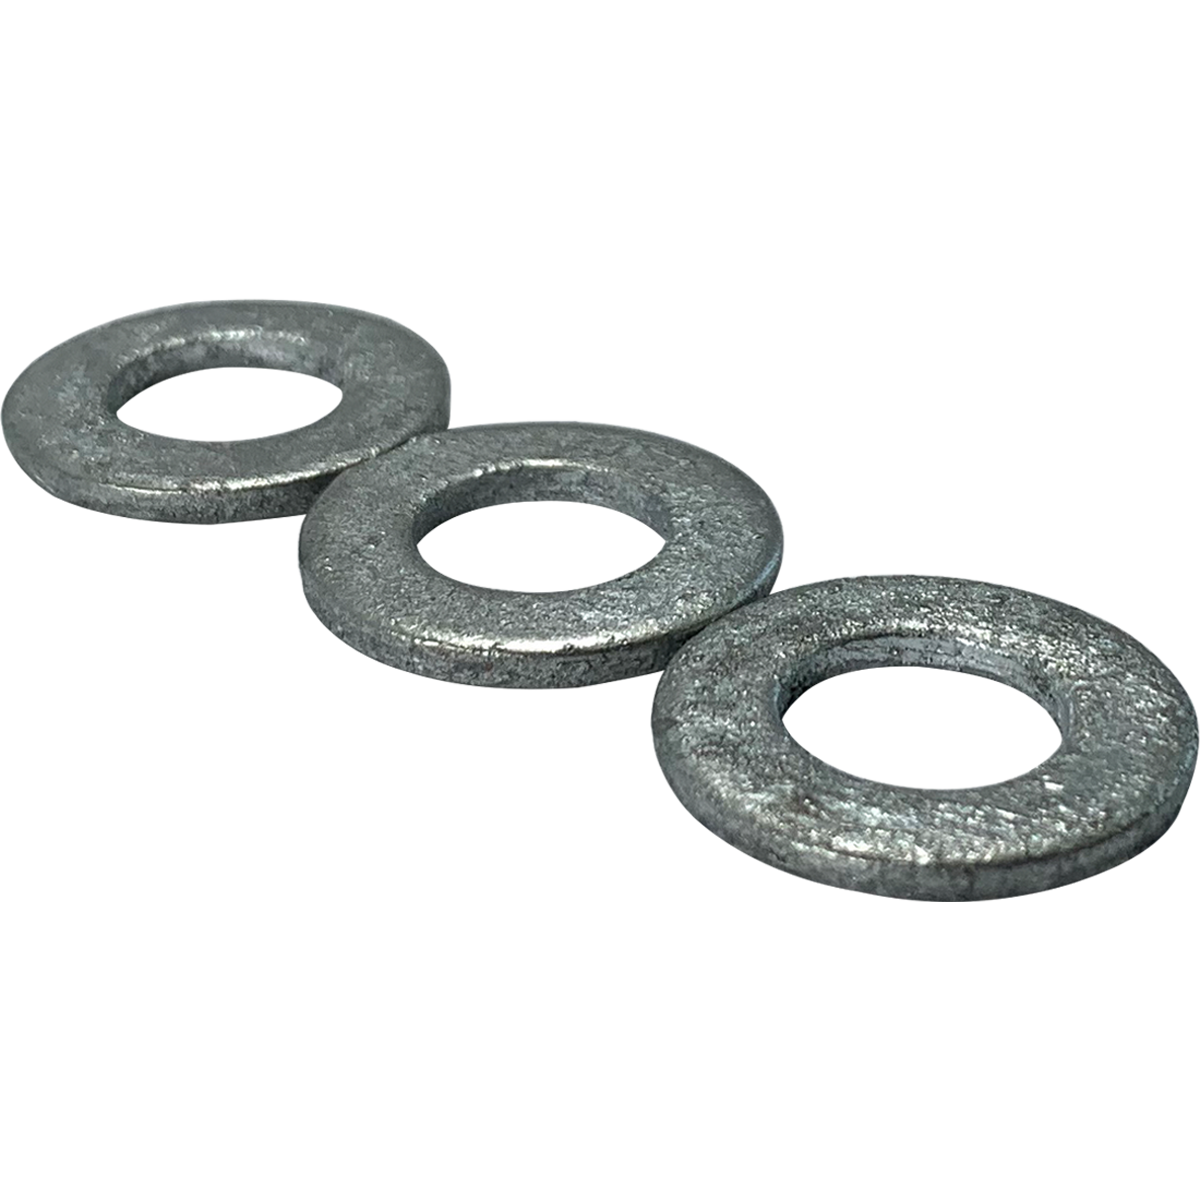 Metric, HDGV galvanised, ‘Form A’ flat washers are available in various diameters